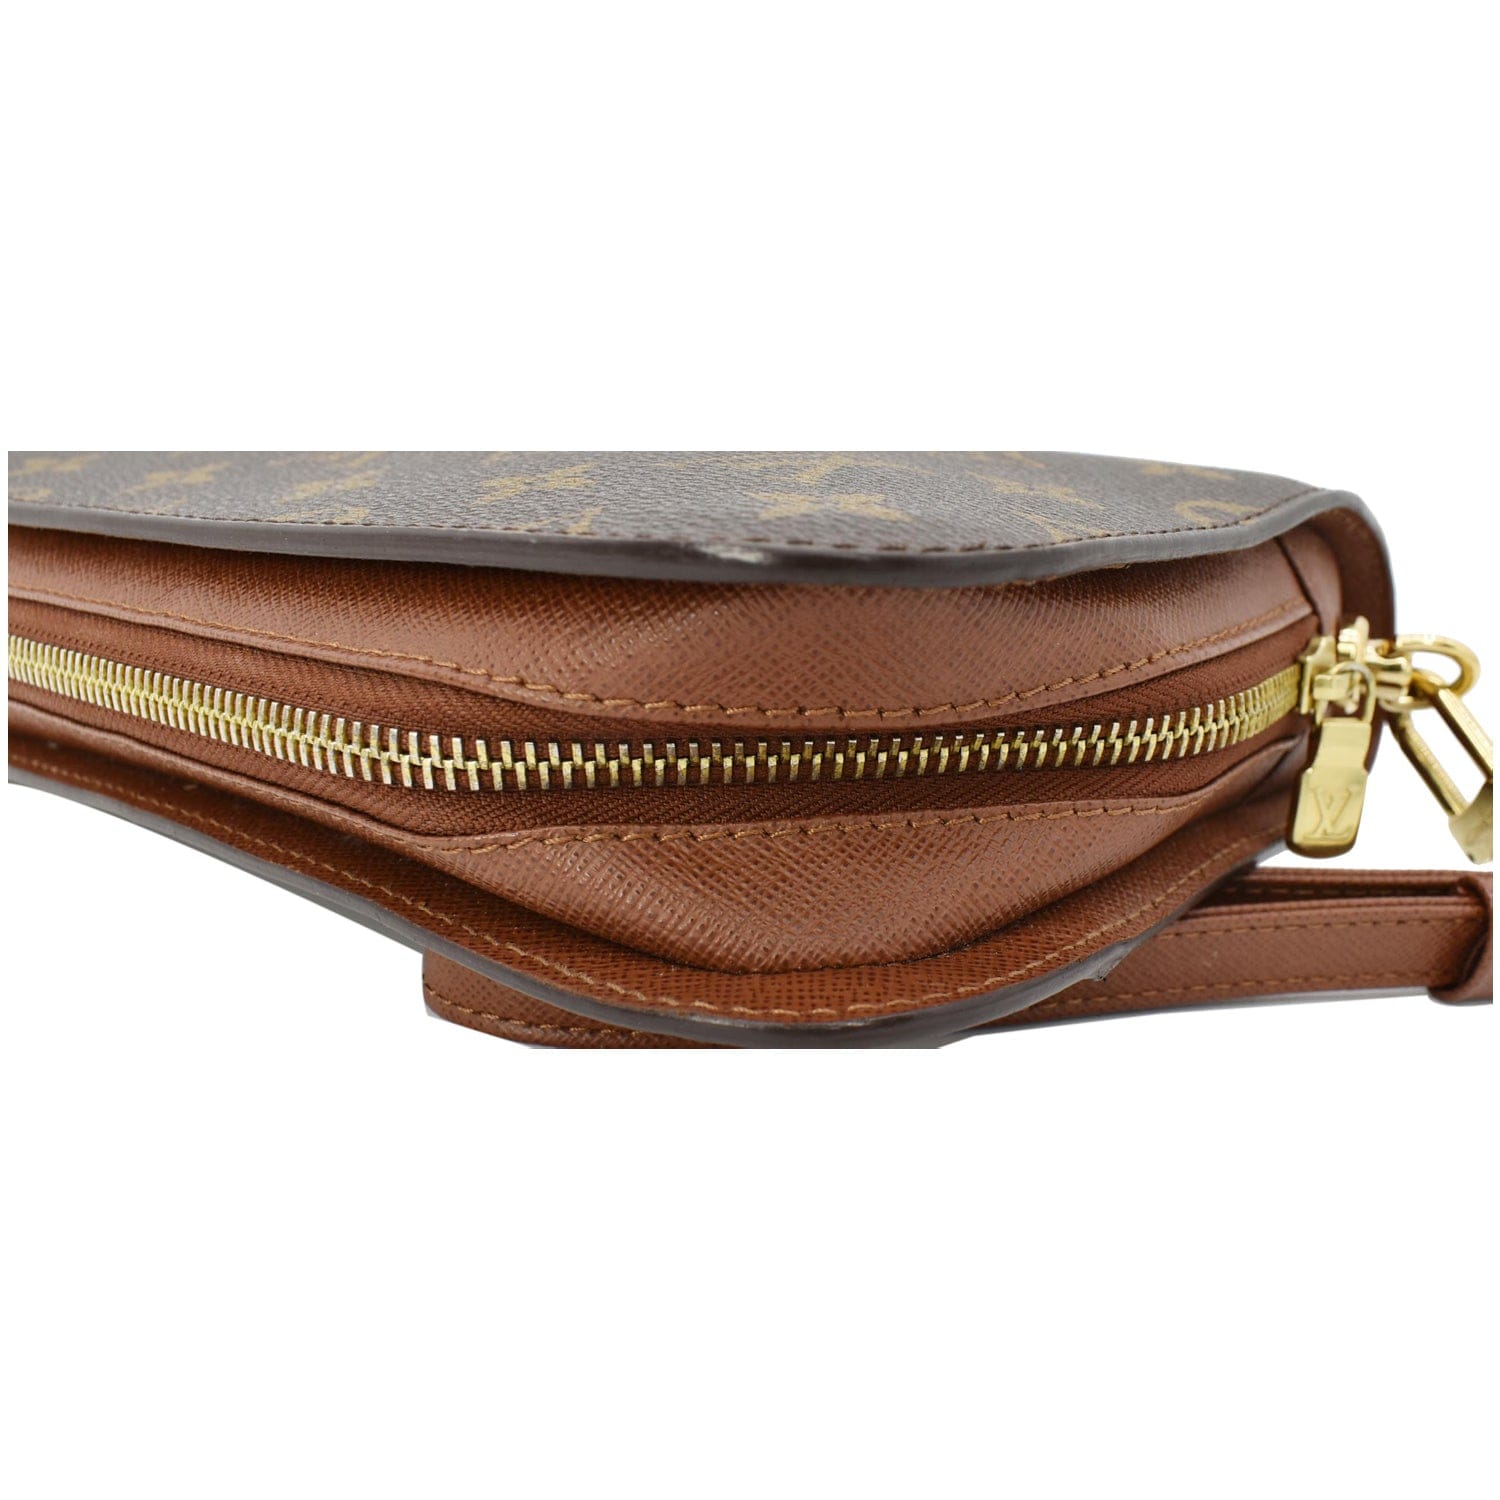 Saint-louis leather clutch bag Louis Vuitton Brown in Leather - 22882825